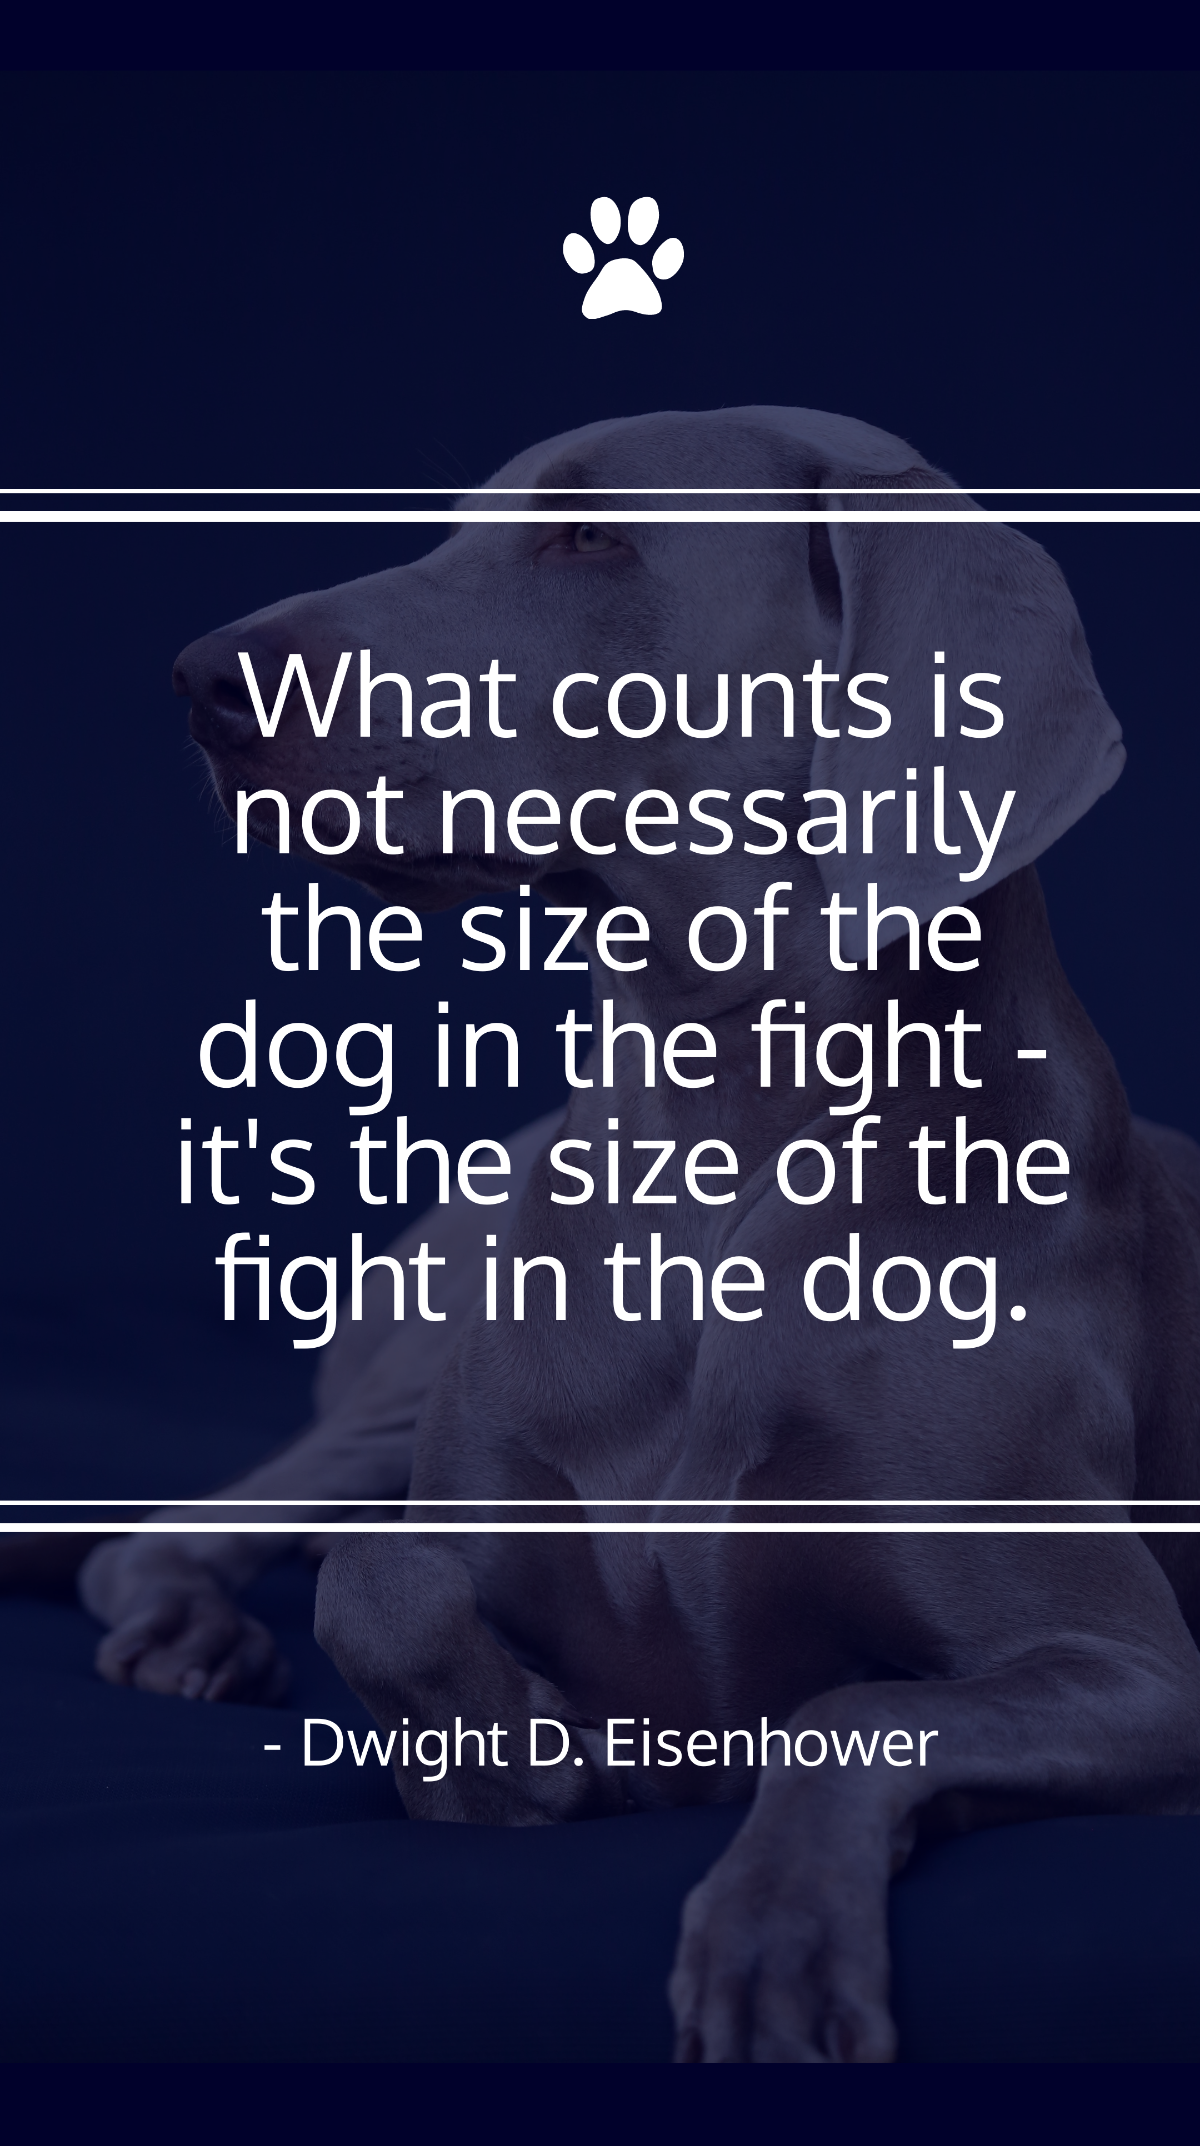 Dwight D. Eisenhower - What counts is not necessarily the size of the dog in the fight - it's the size of the fight in the dog. Template